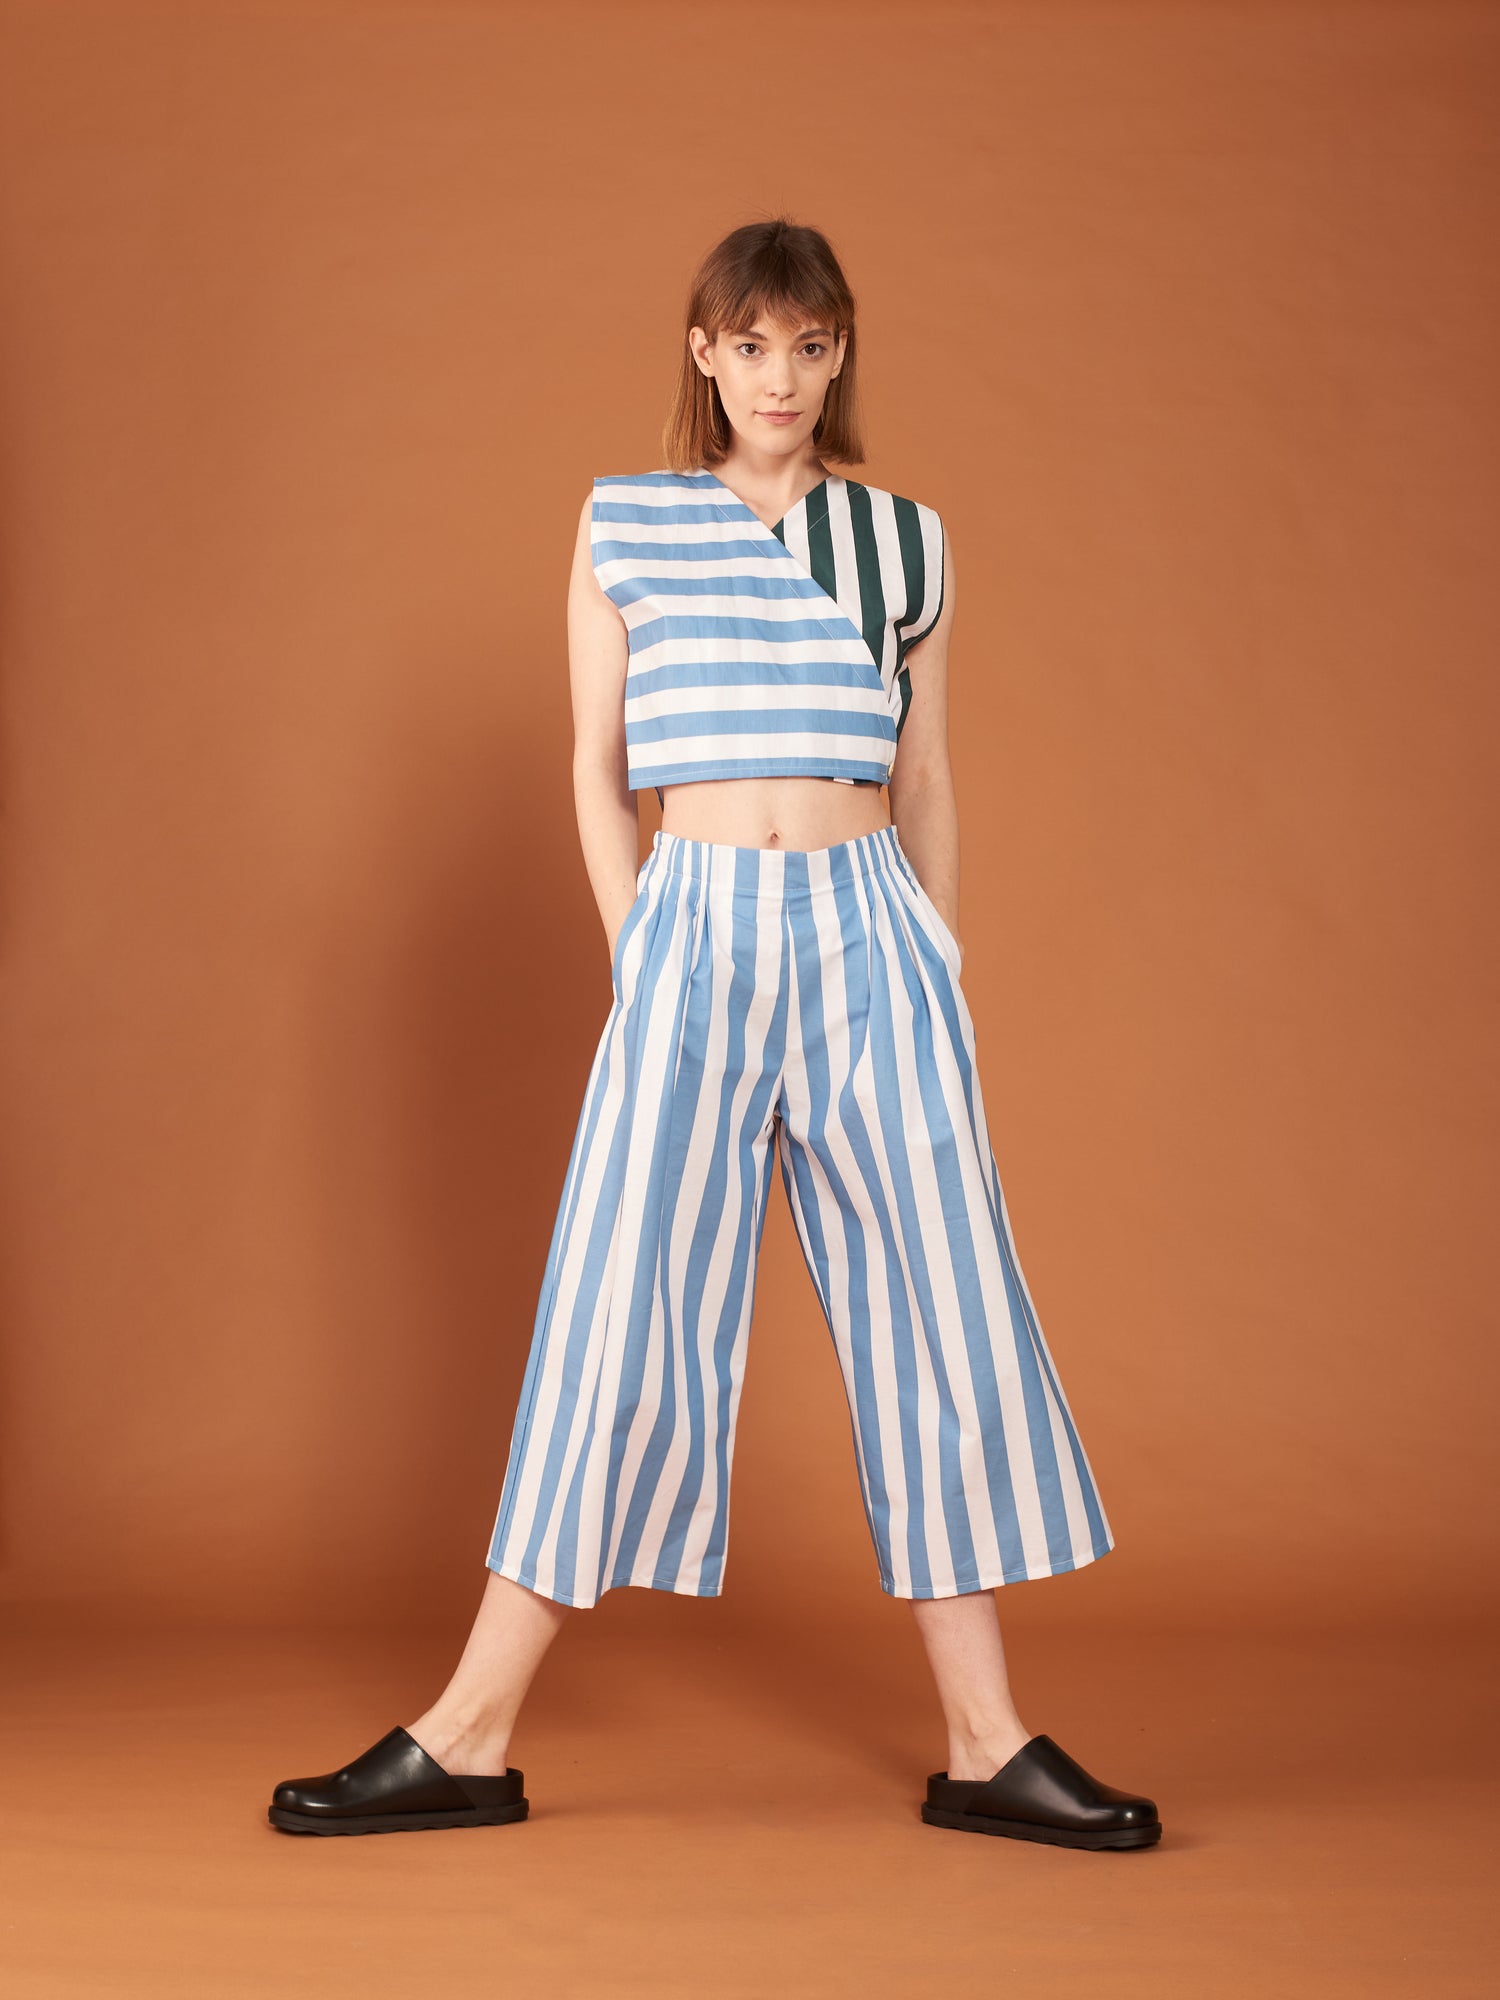 Color block striped overlapping women's top